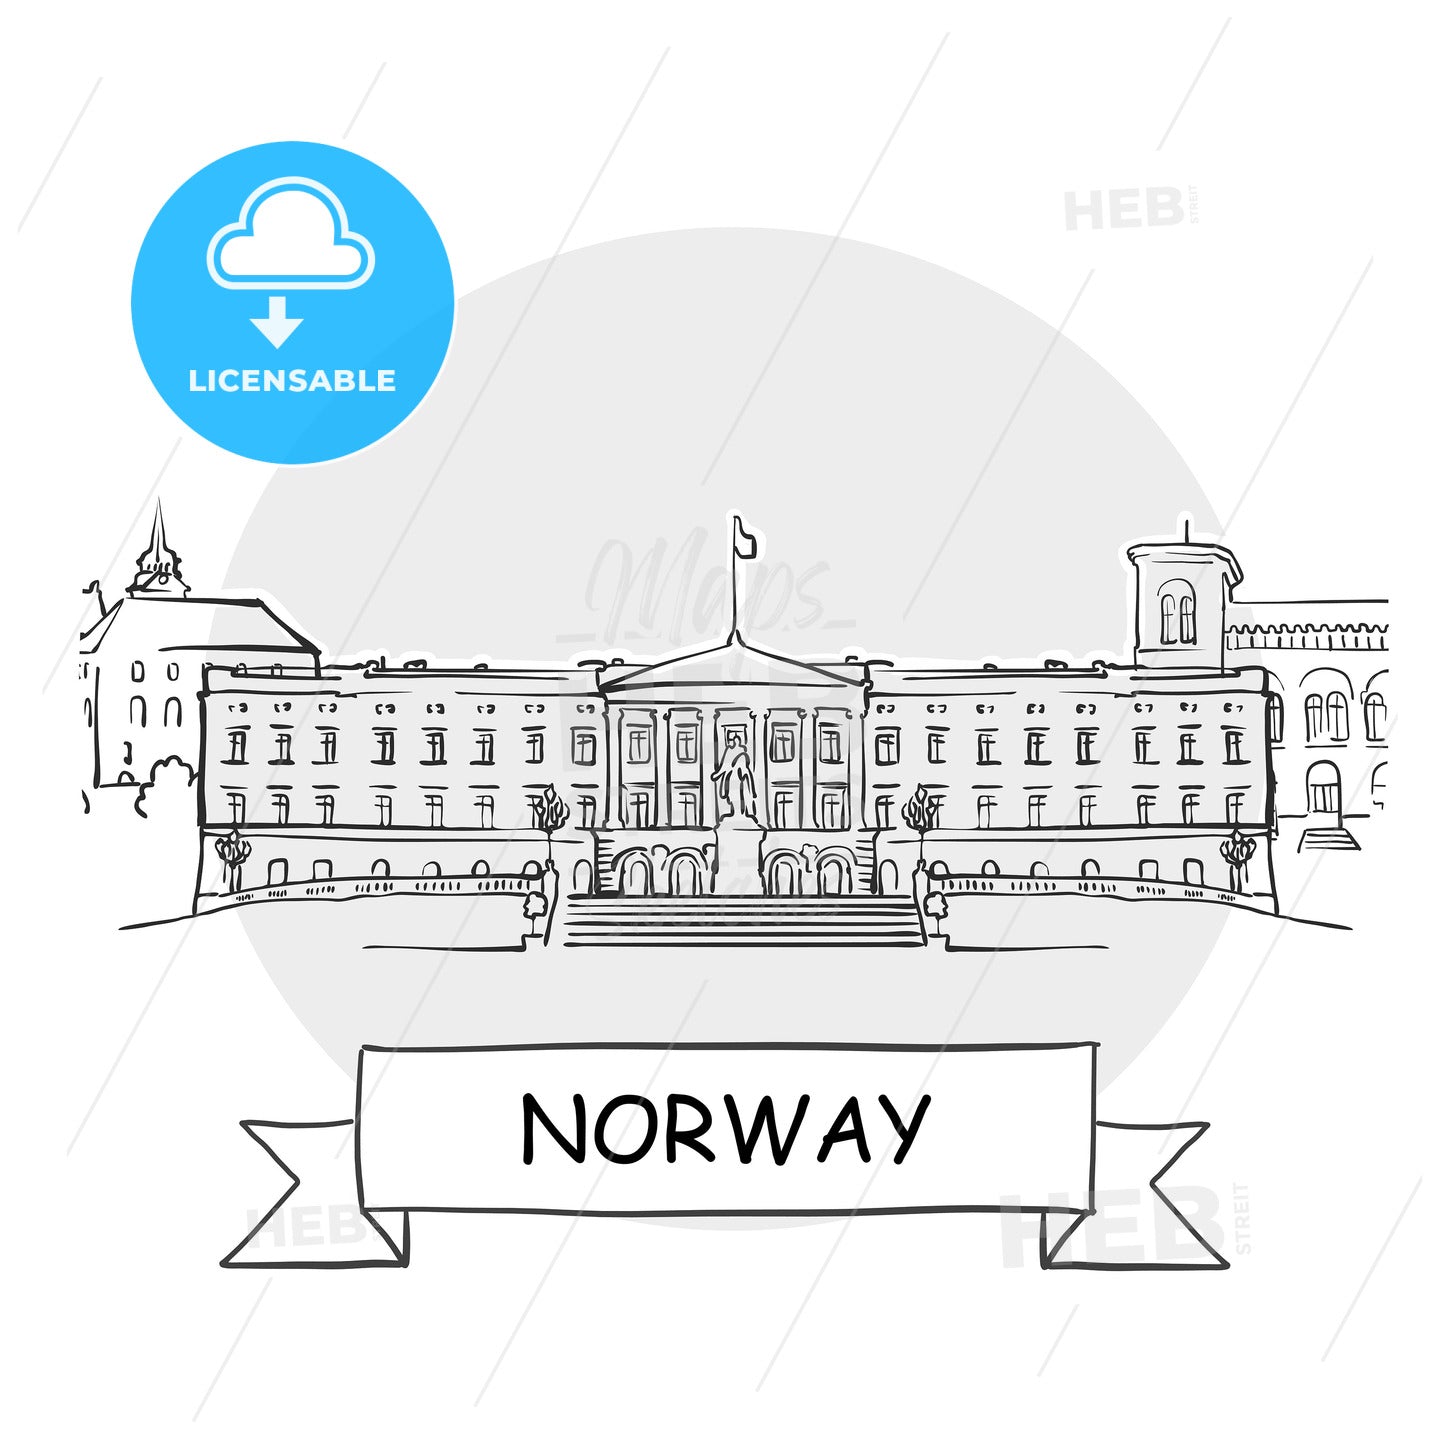 Norway hand-drawn urban vector sign – instant download